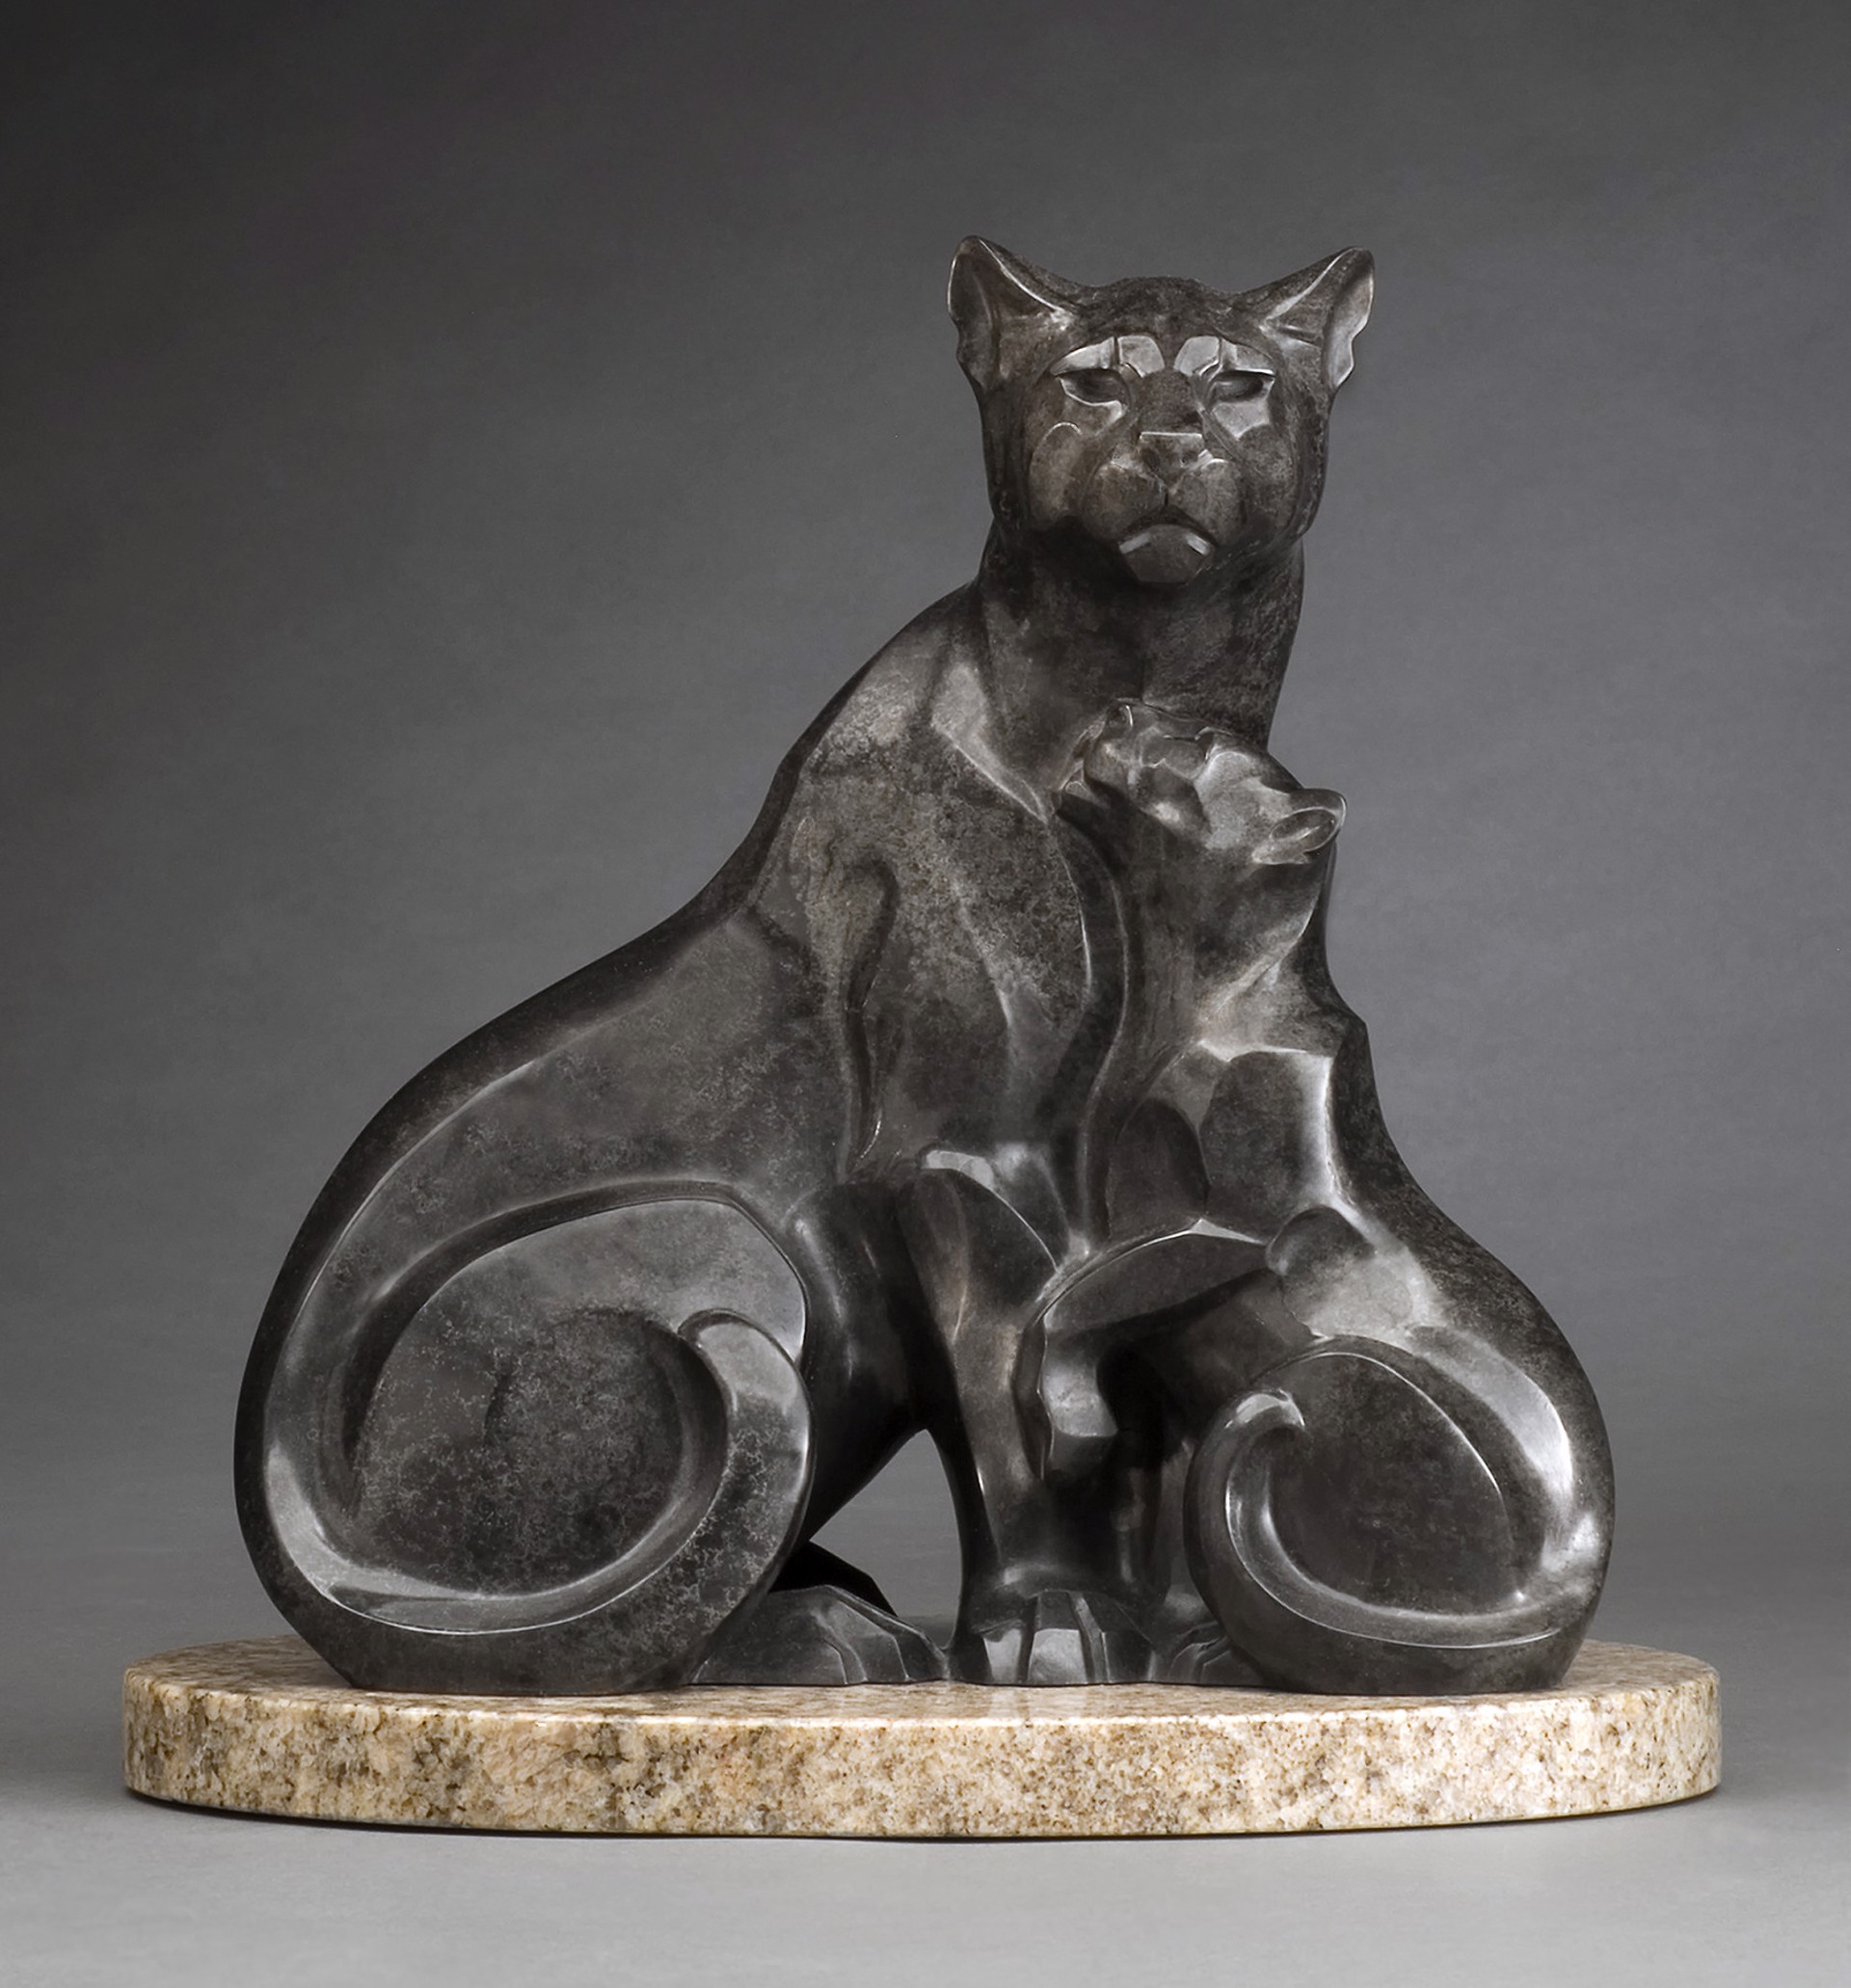 Panther's Pride Maquette by Rosetta